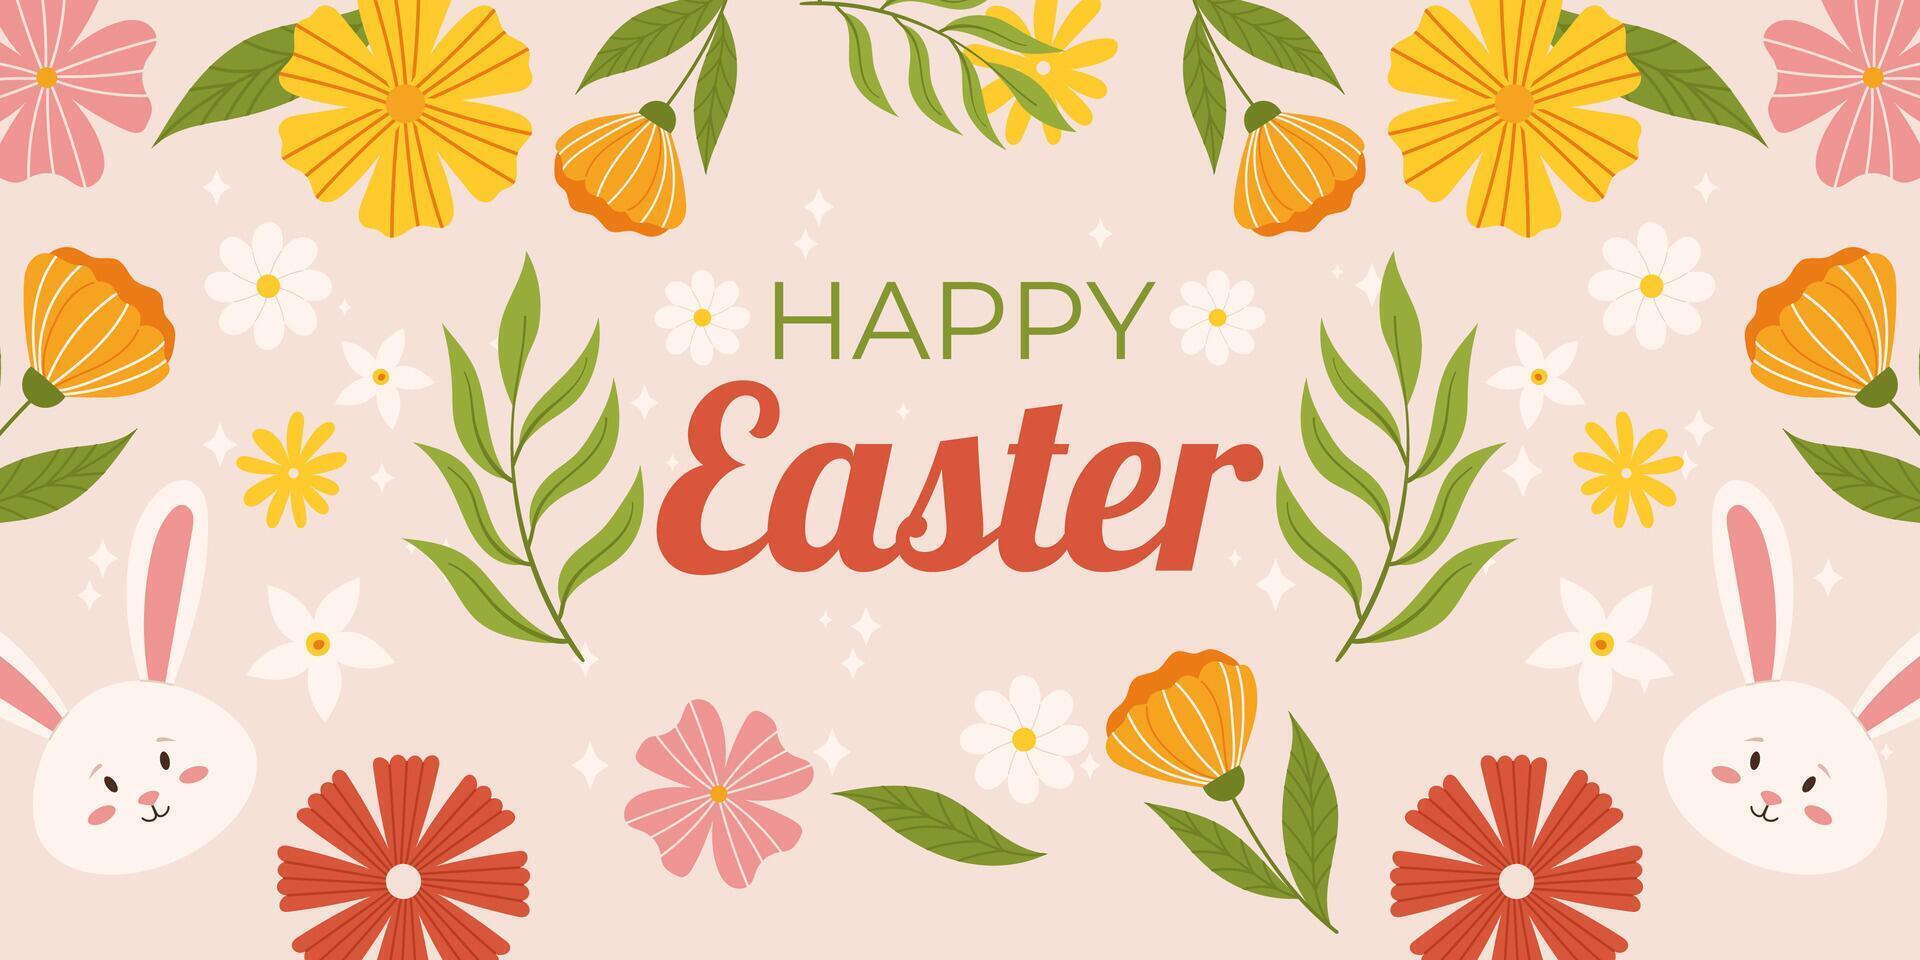 Happy Easter horizontal background template. Design with cute bunny, flowers and leaves around vector